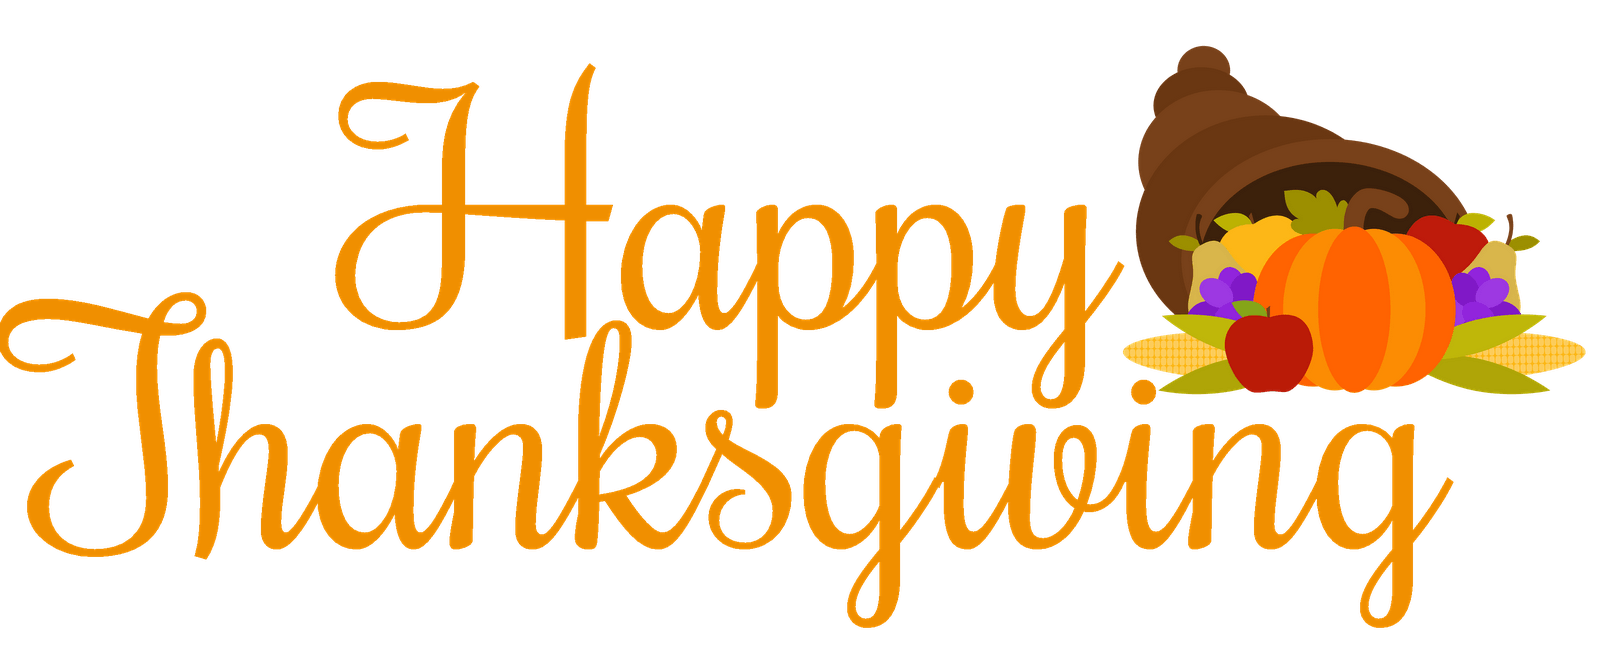 Thanksgiving Day 2017 Image, Wallpapers, Pictures, Photos, Pics